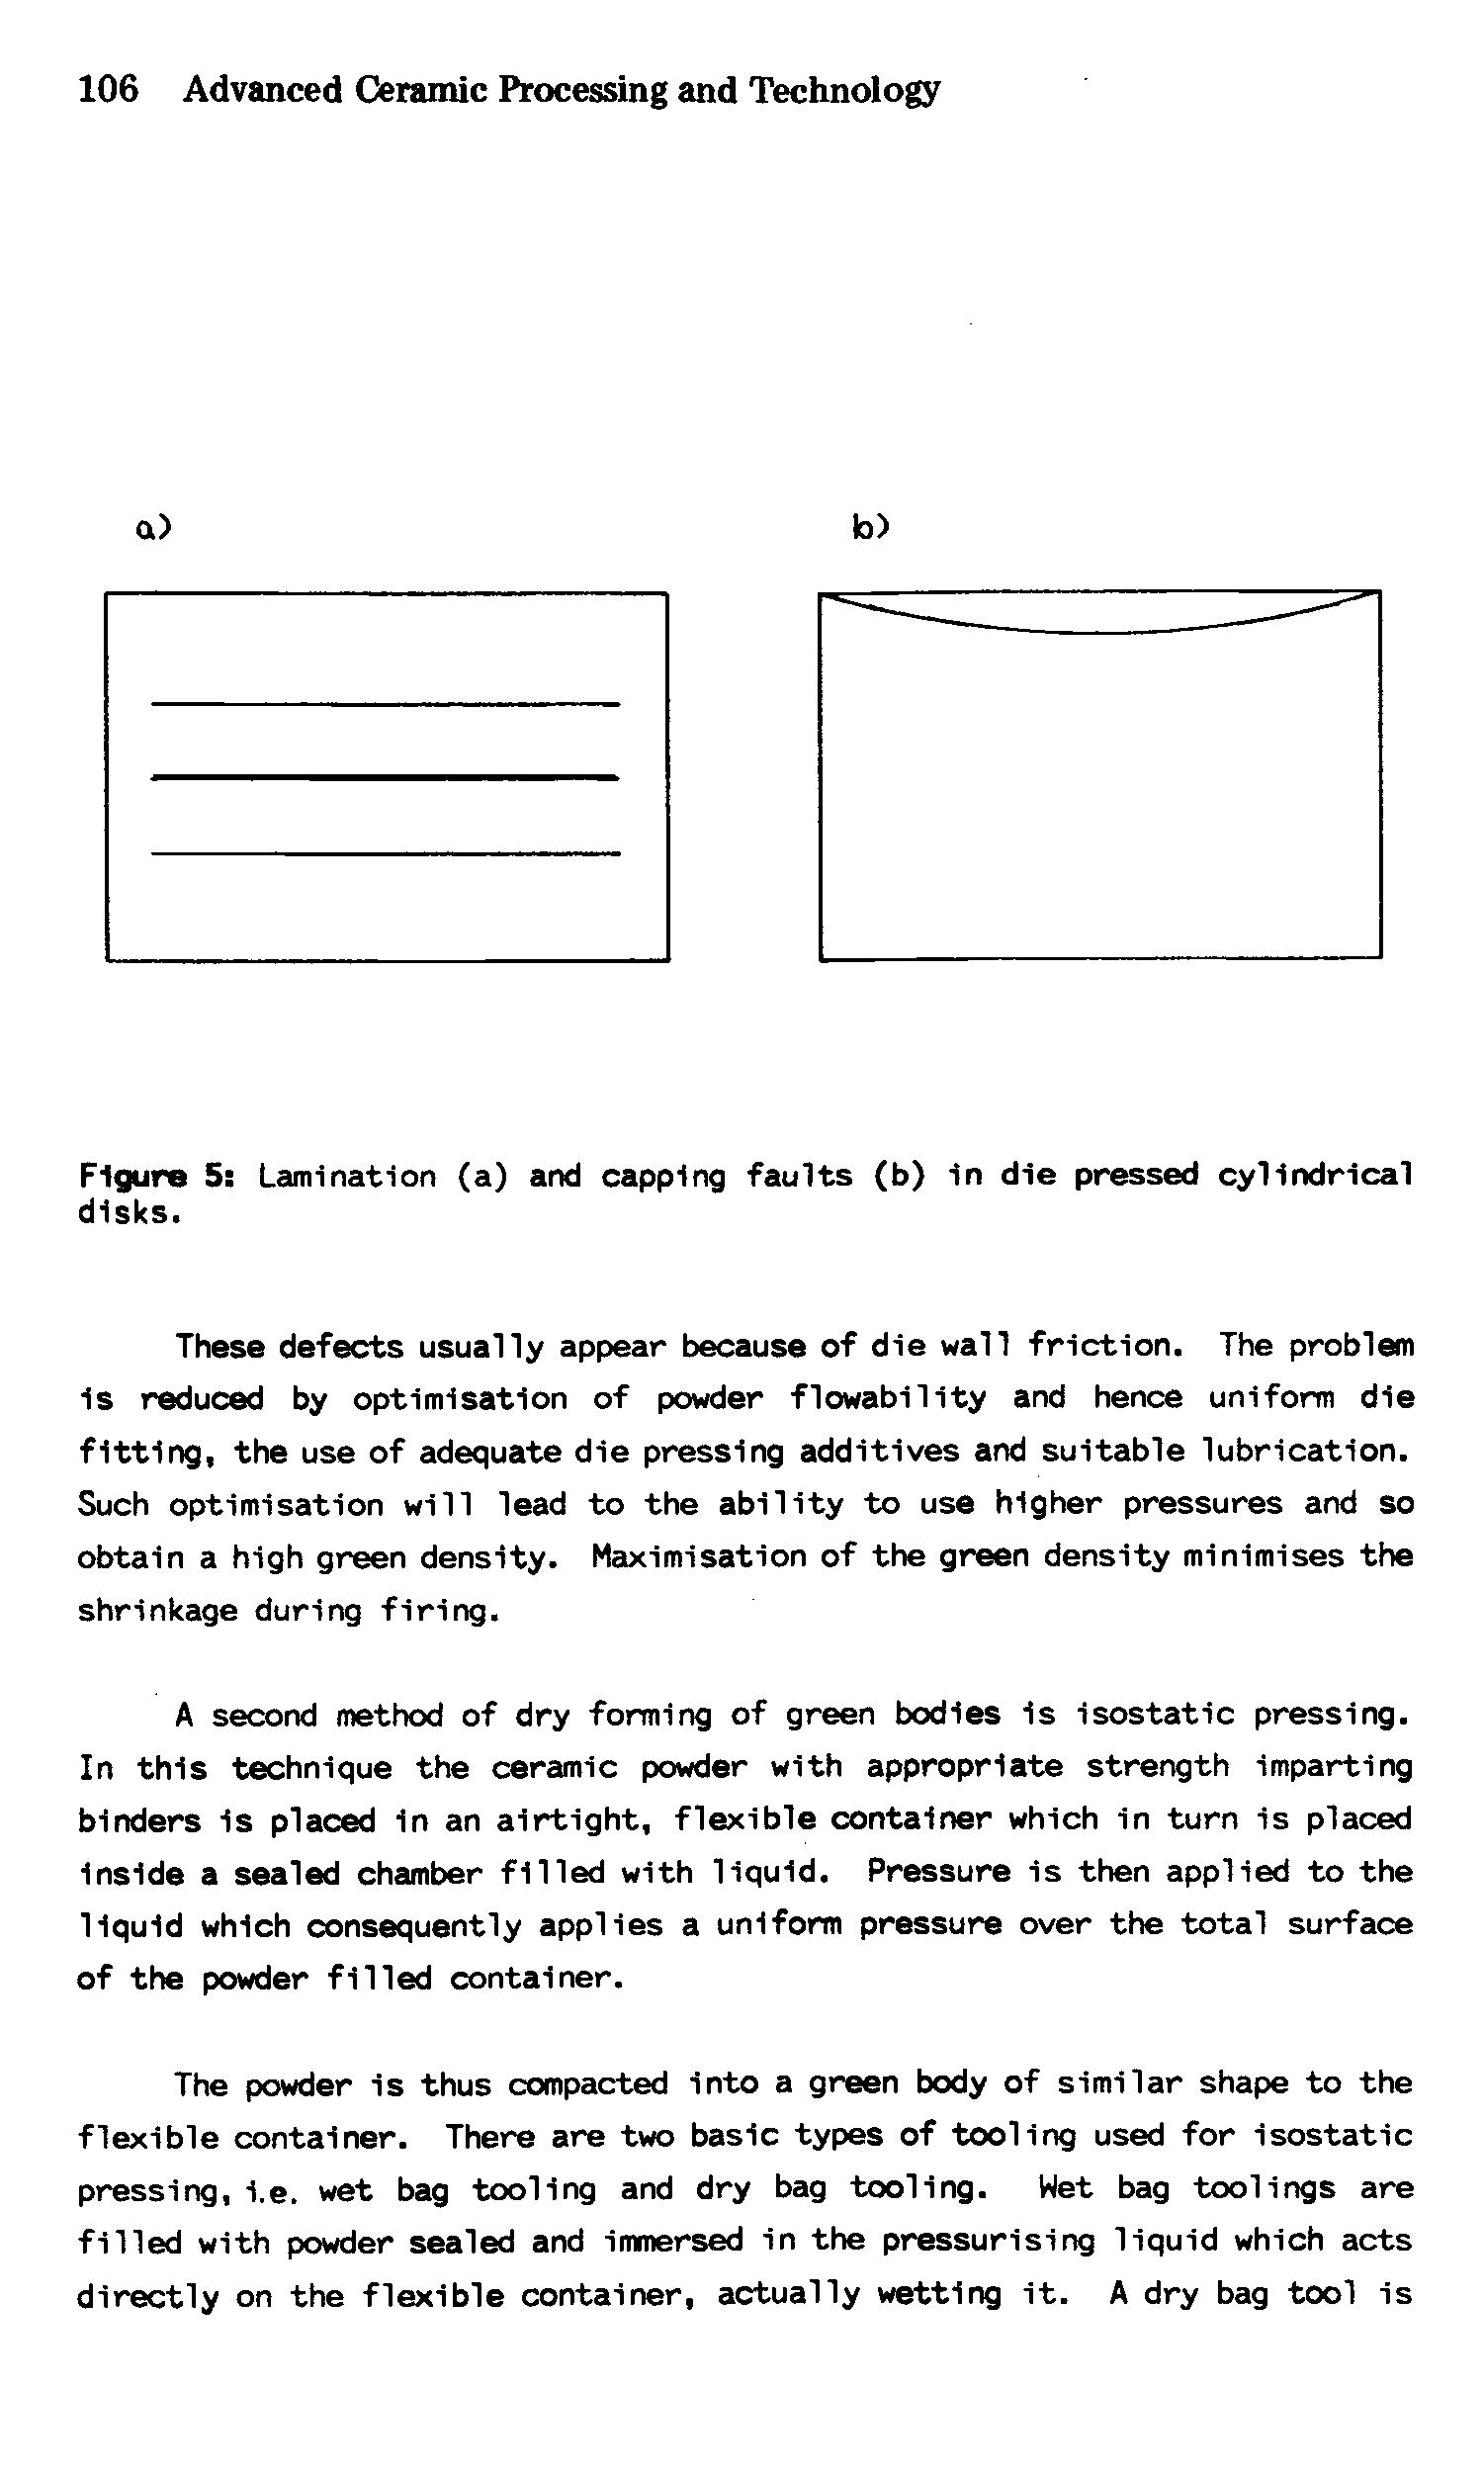 Figure 5 Leunination (a) and capping faults (b) 1n die pressed cylindrical disks.